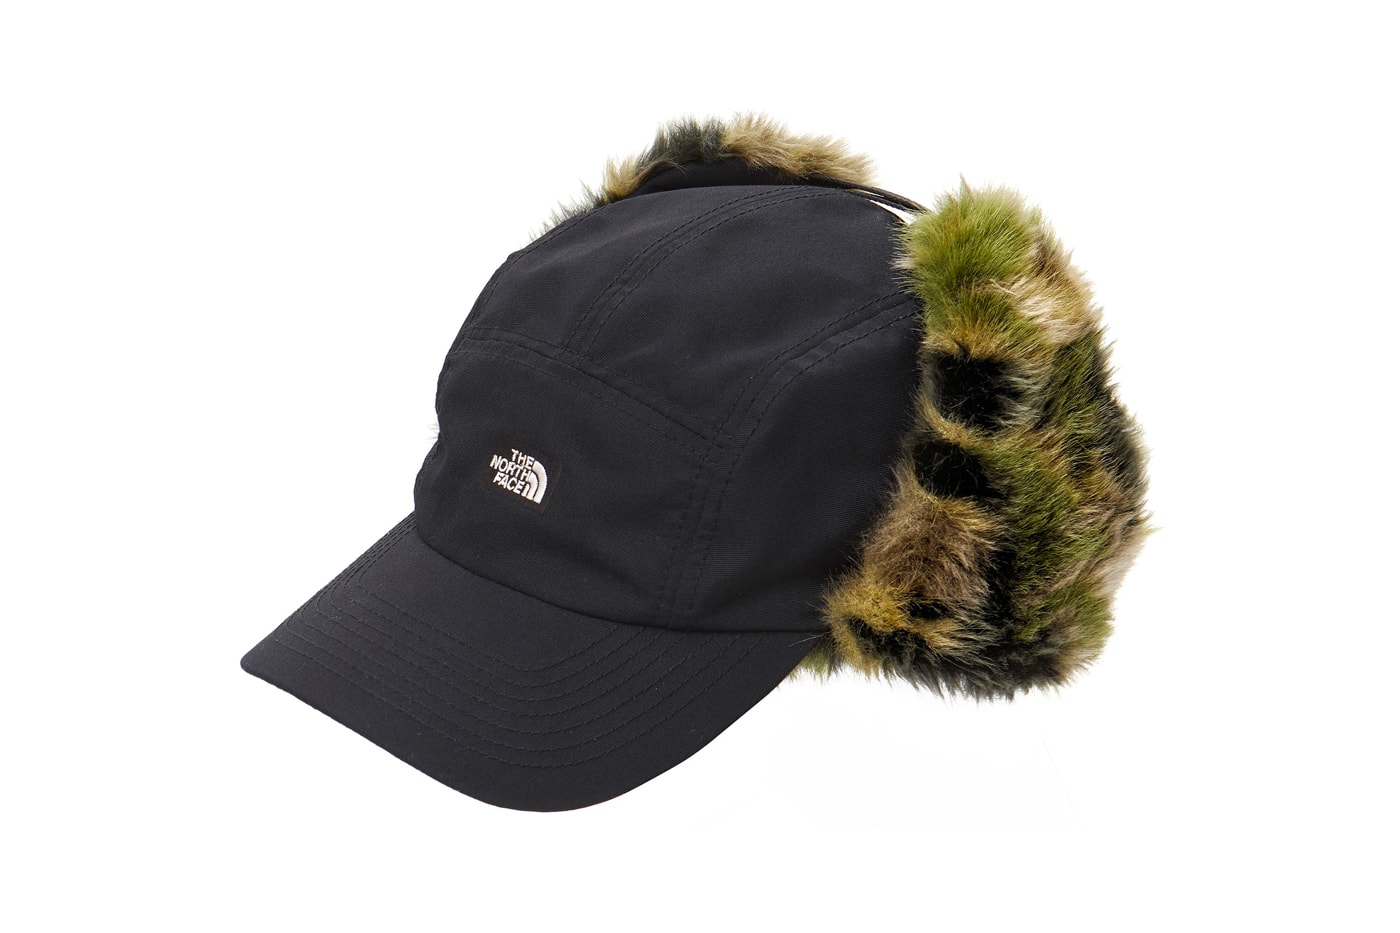 THE NORTH FACE PURPLE LABEL Camo Fur Frontier Cap Field Shoulder Bag Pouch fall winter 2019 accessories bags outdoor apparel